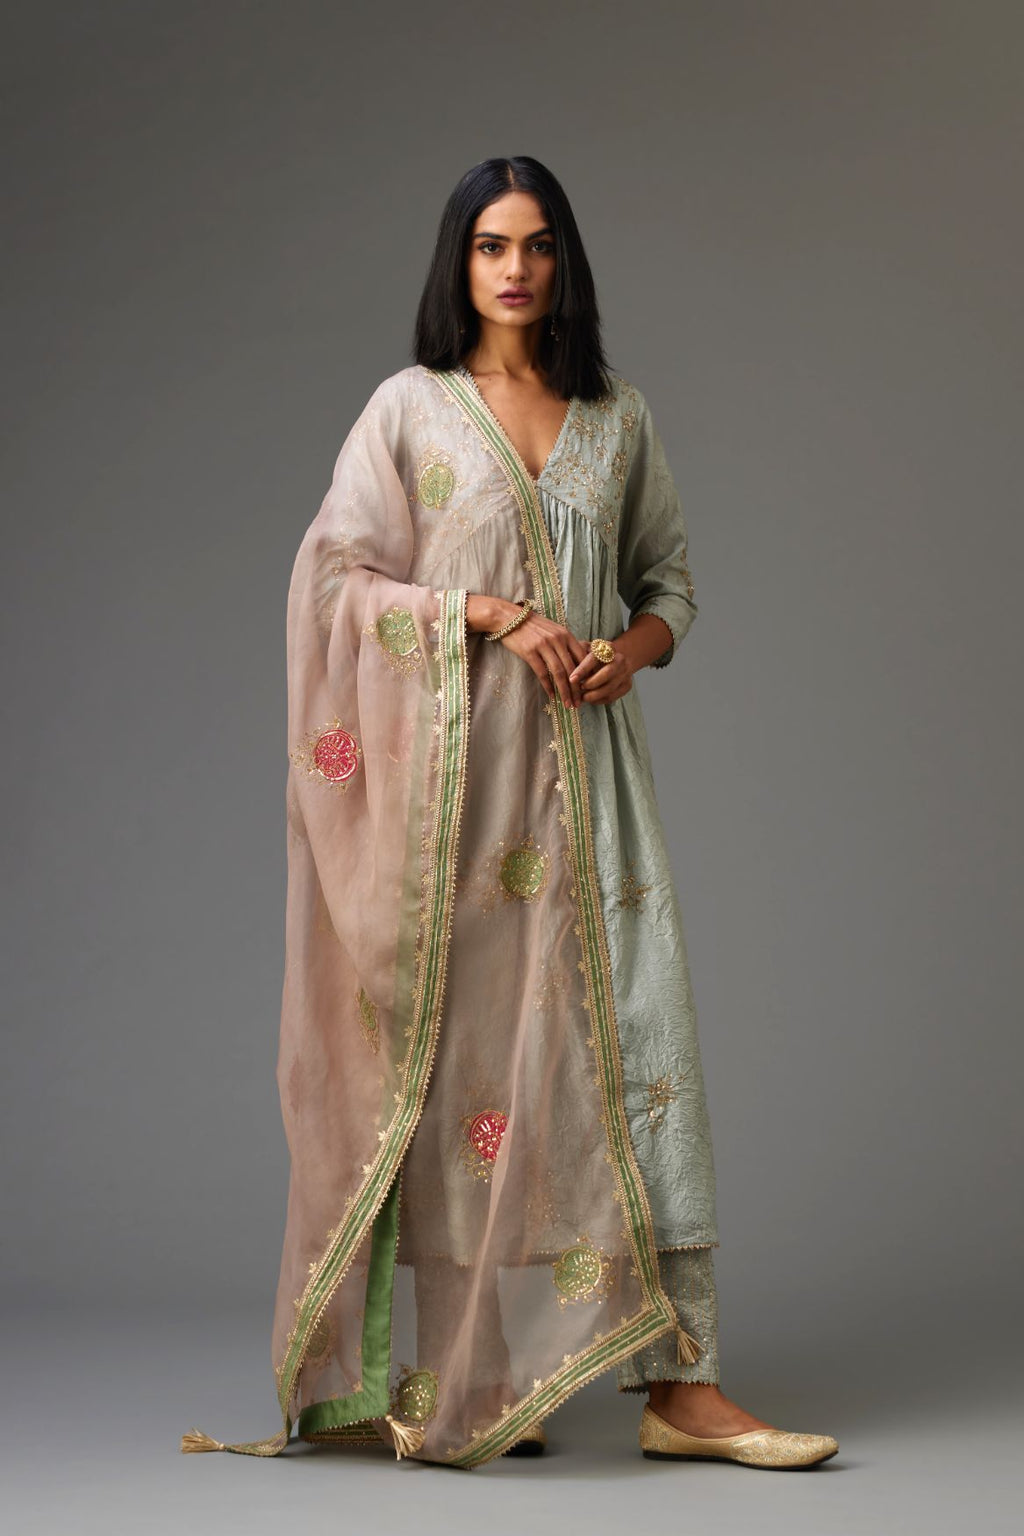 Old rose silk organza dupatta highlighted with all-over embroidered boota and contrast colored border running along all edges.